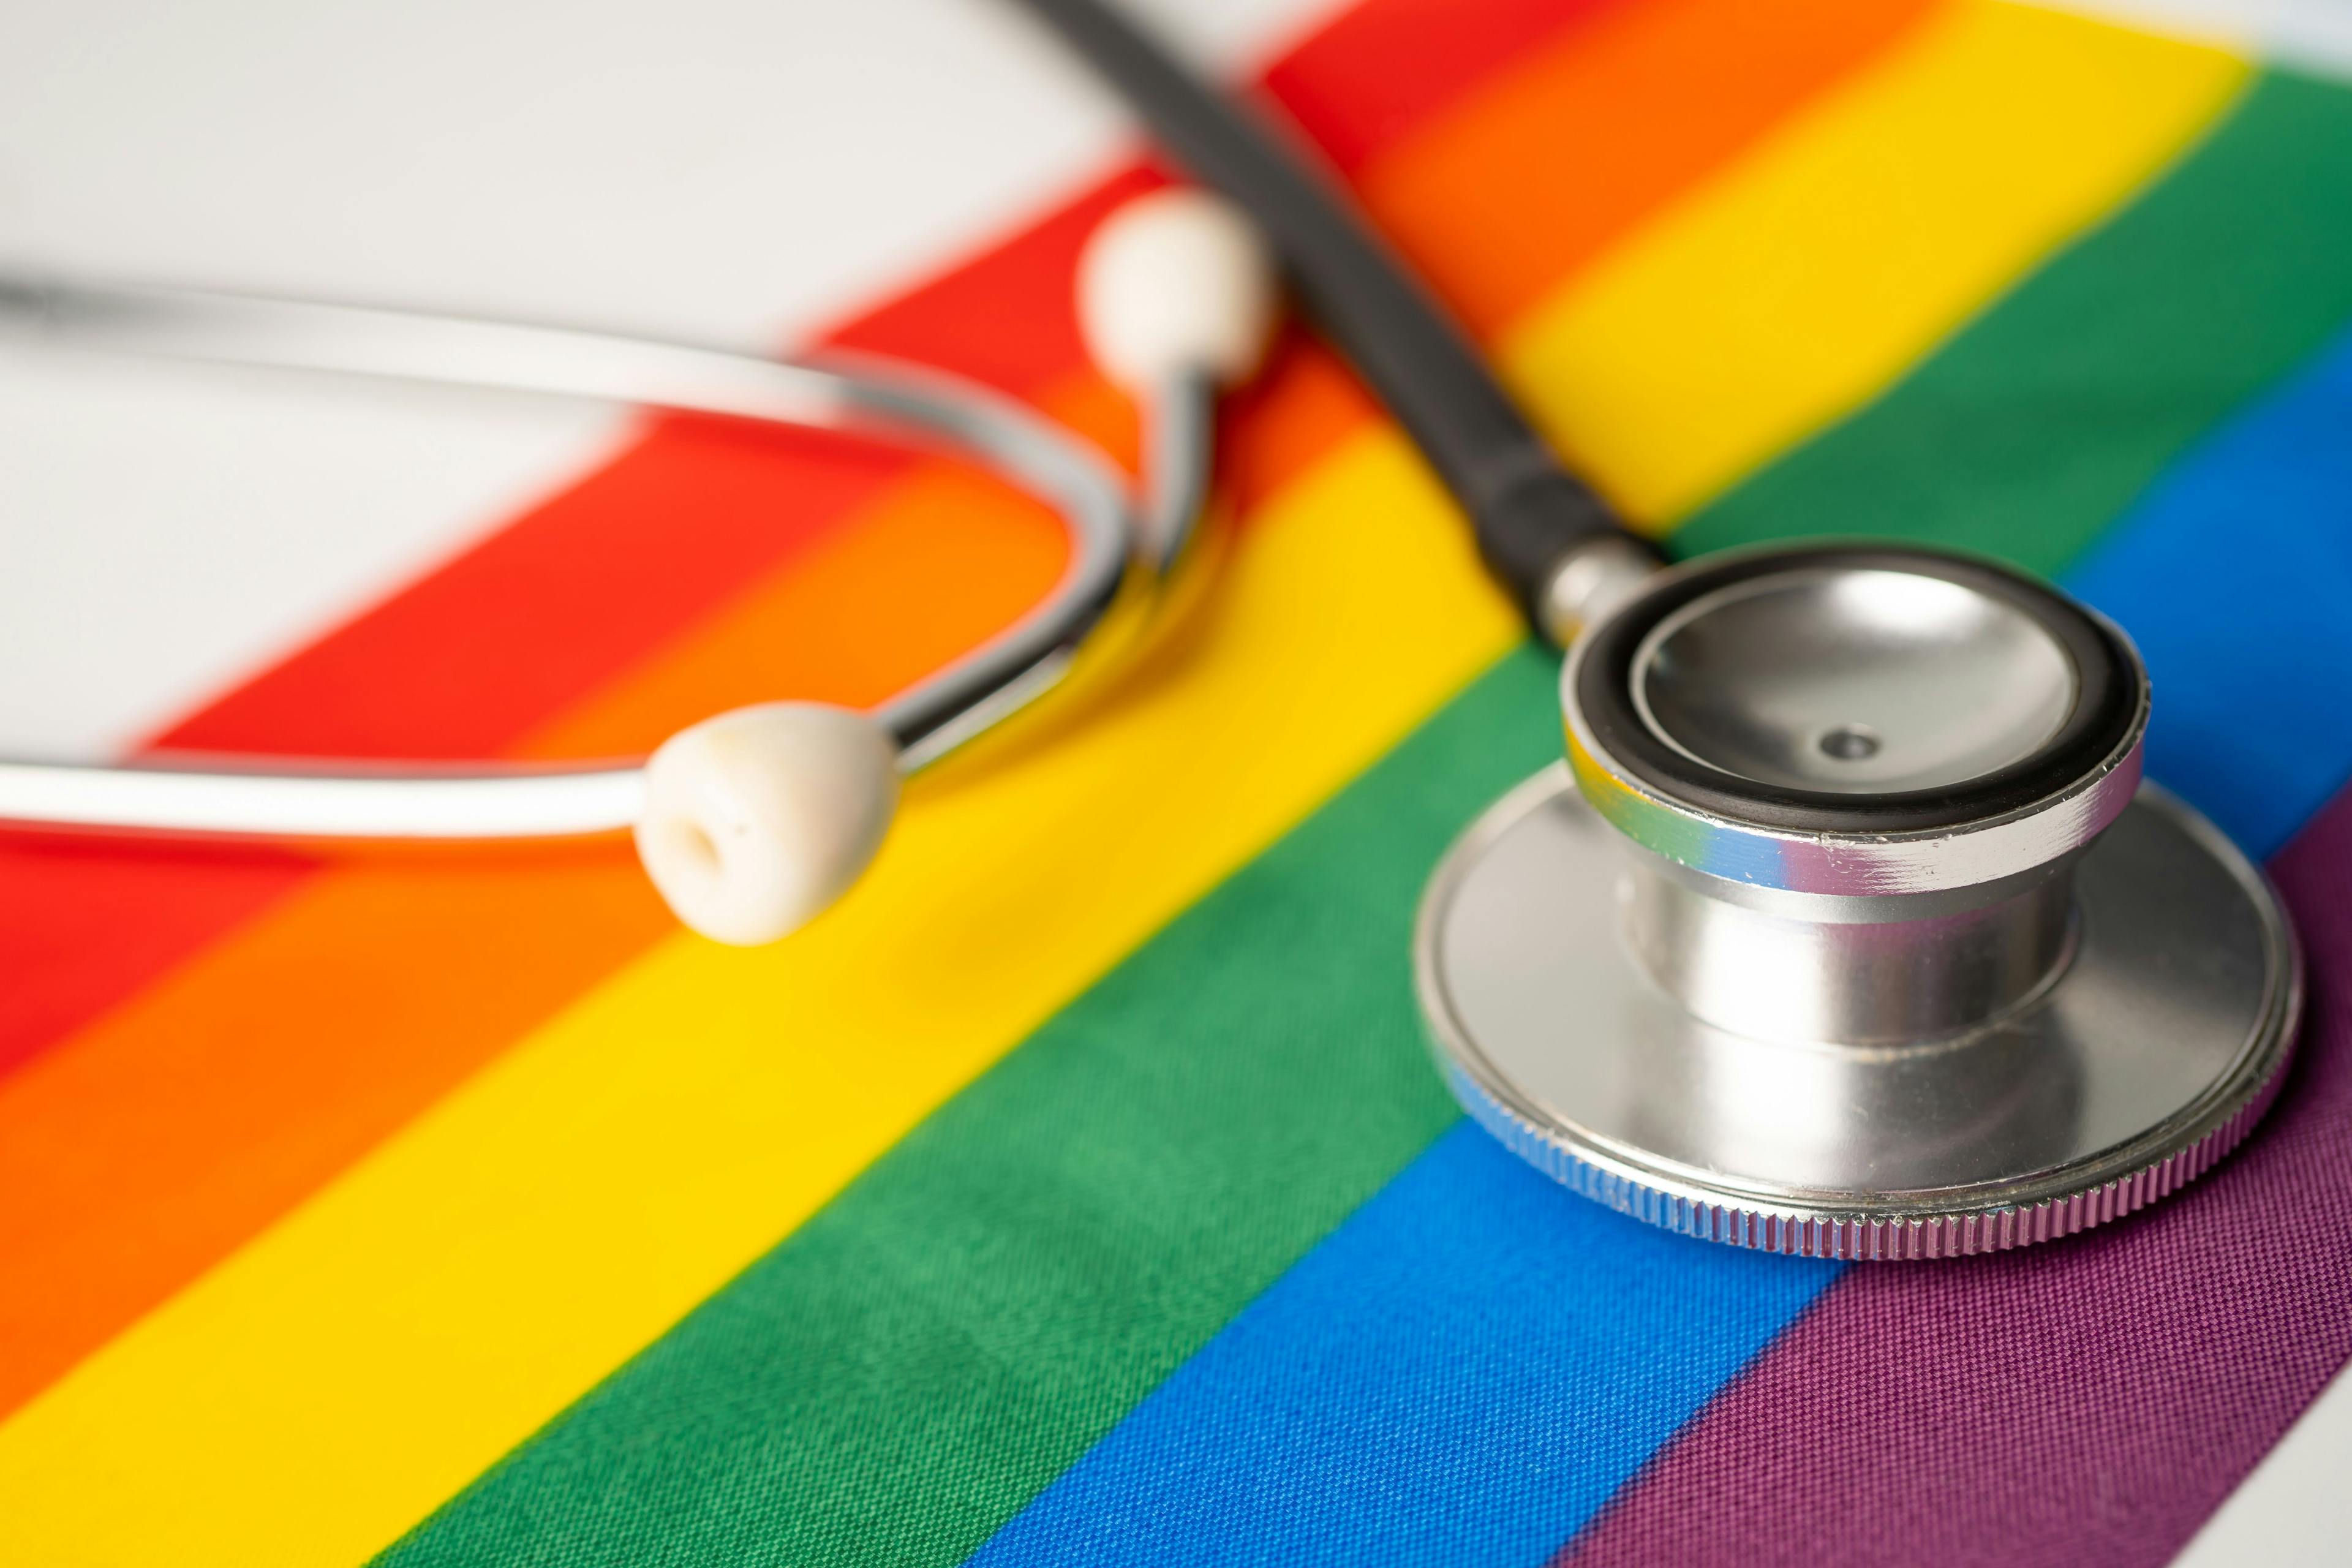 Black stethoscope on rainbow background, symbol of LGBT pride month celebrate annual in June social, symbol of gay, lesbian, gay, bisexual, transgender, human rights and peace. | Image credit: amazing studio - stock.adobe.com